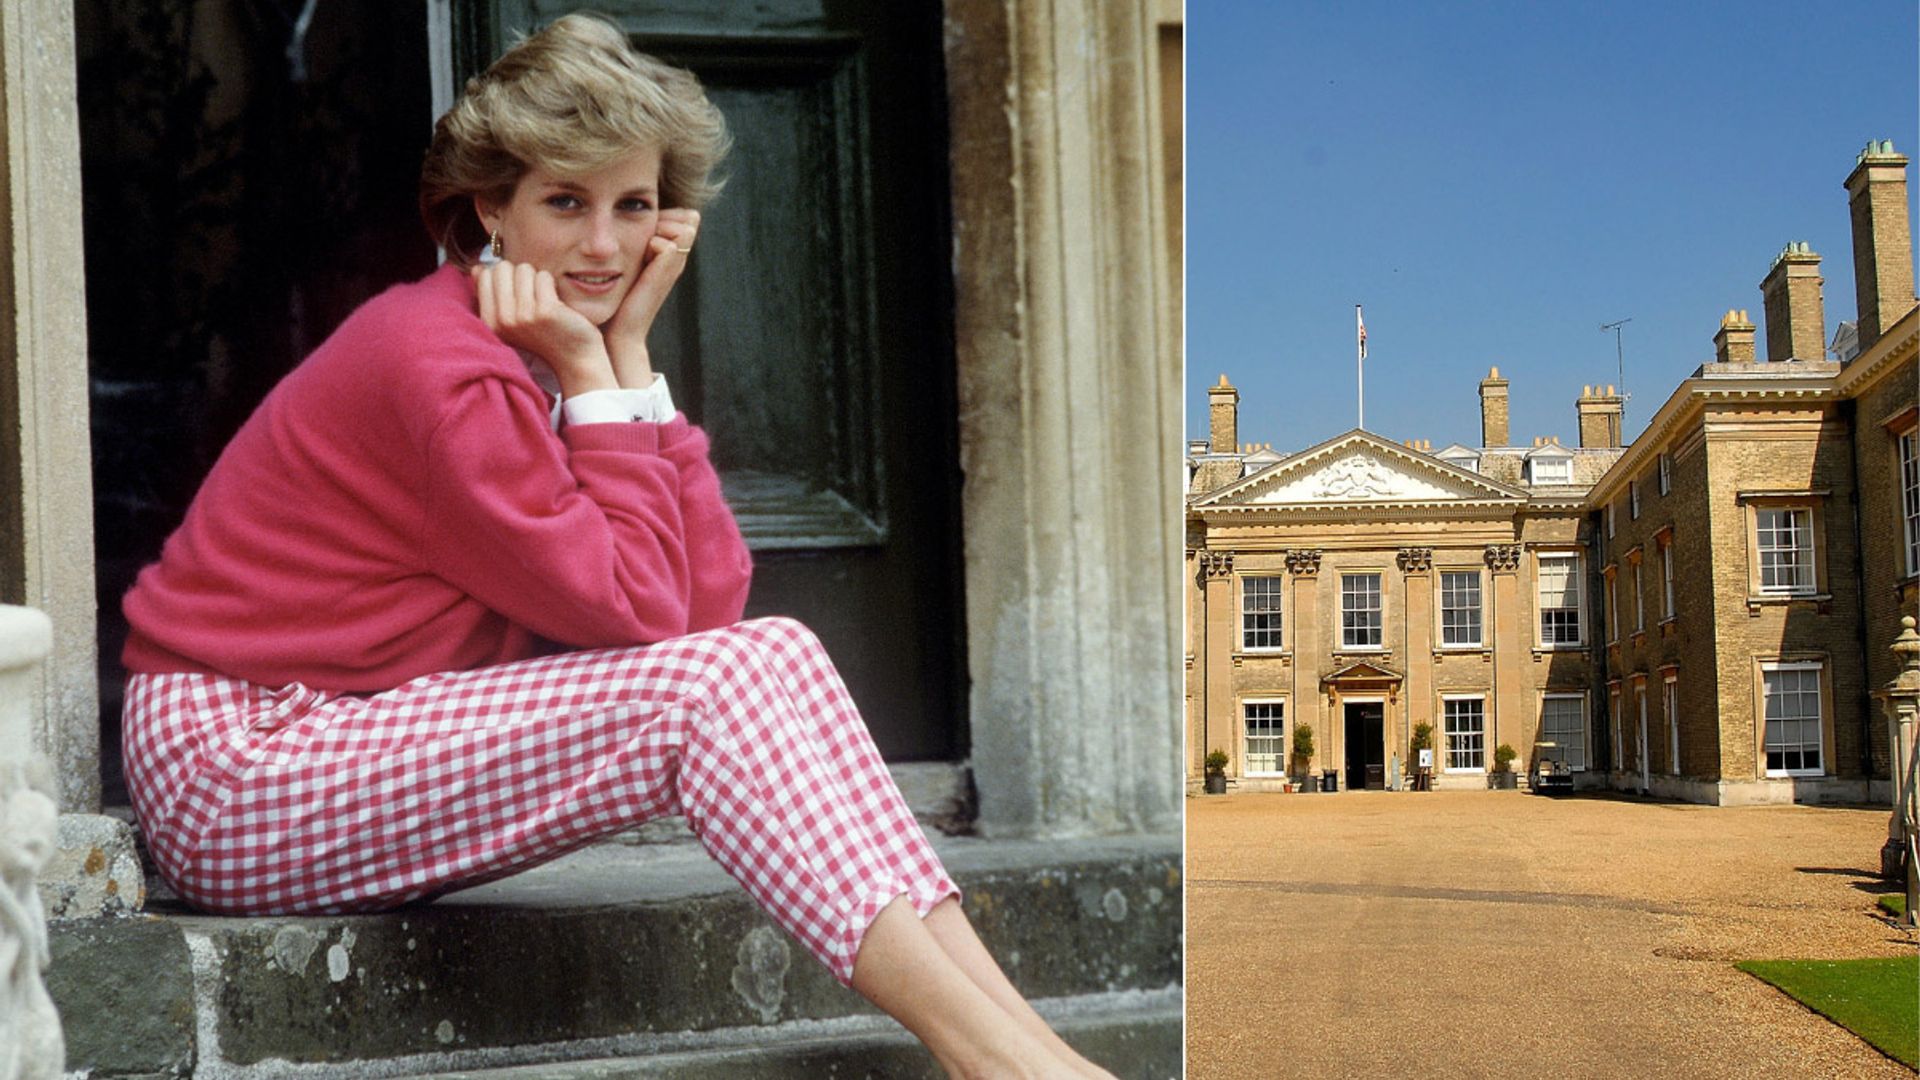 Big plans for Princess Diana's former home spearheaded by Charles Spencer's wife